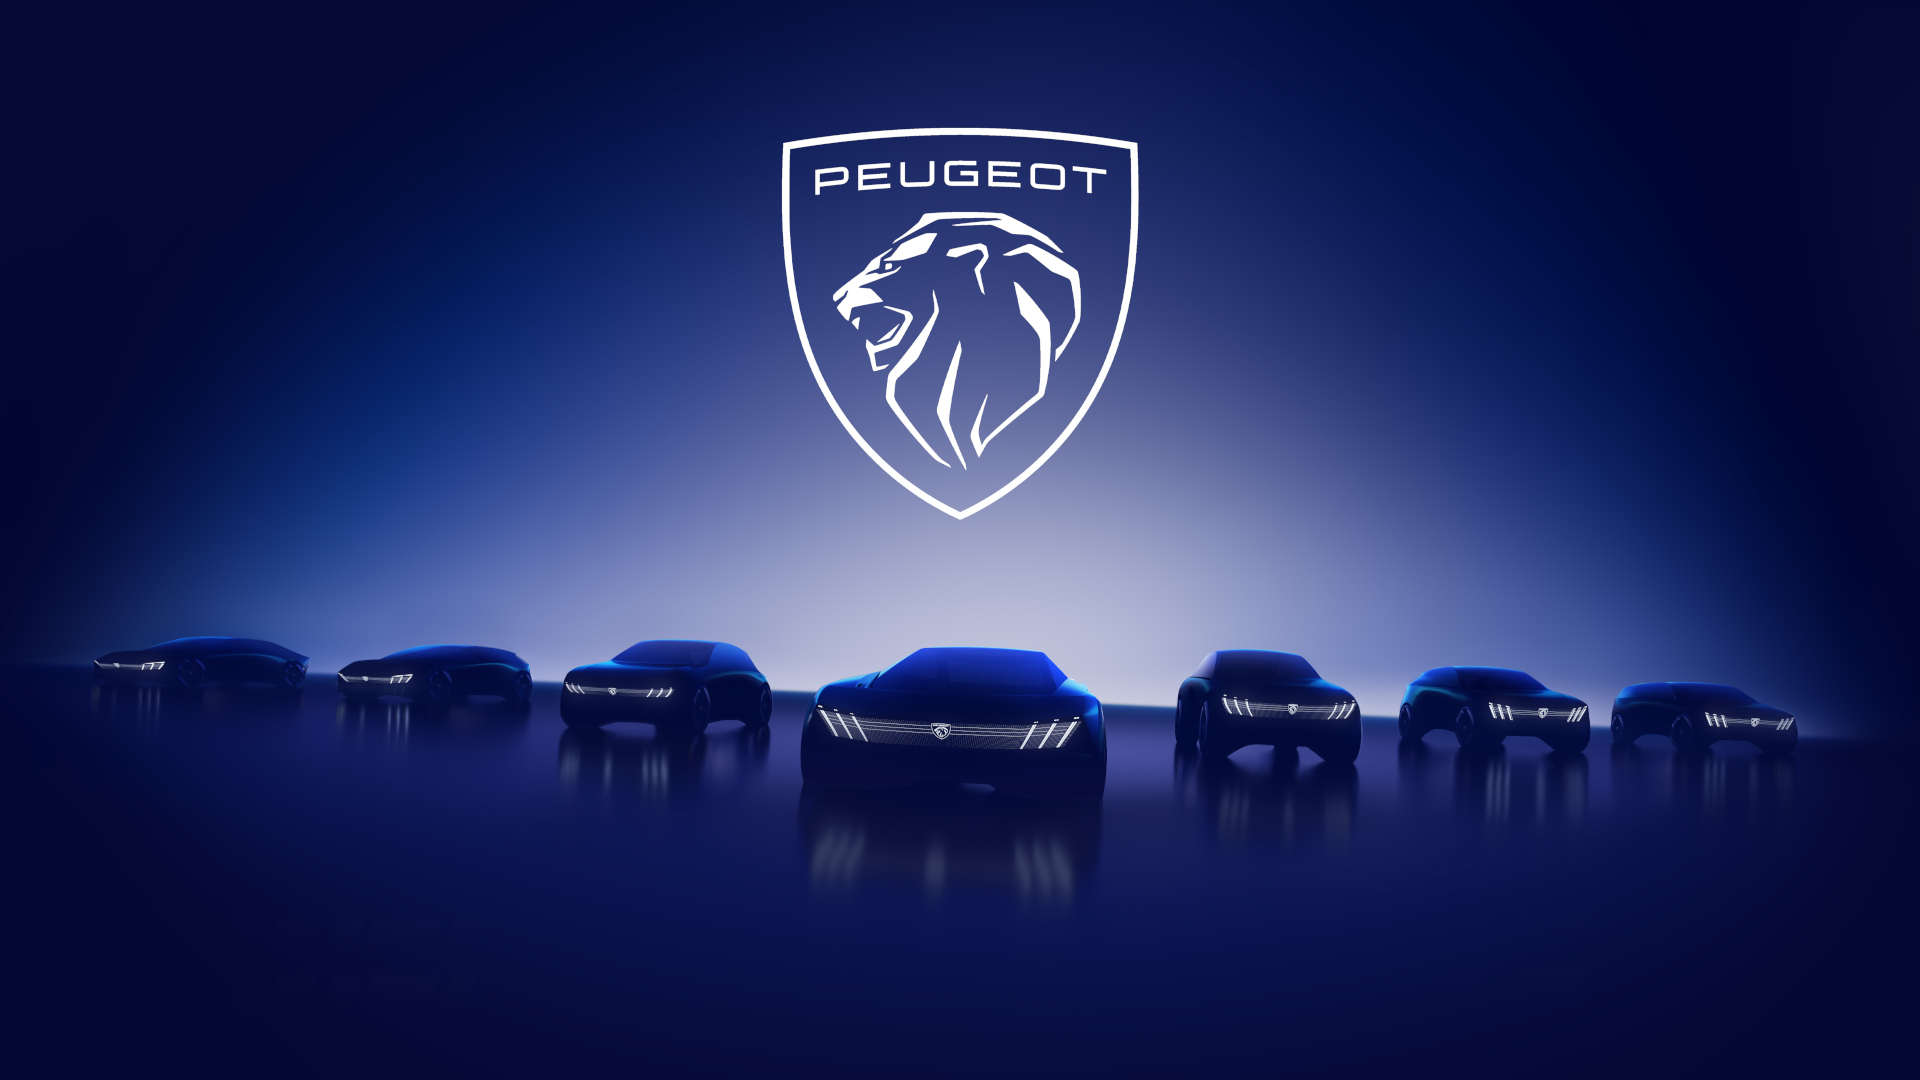 PEUGEOT E-LION DAY, 100% ELECTRIC 100% IRRESISTIBLE